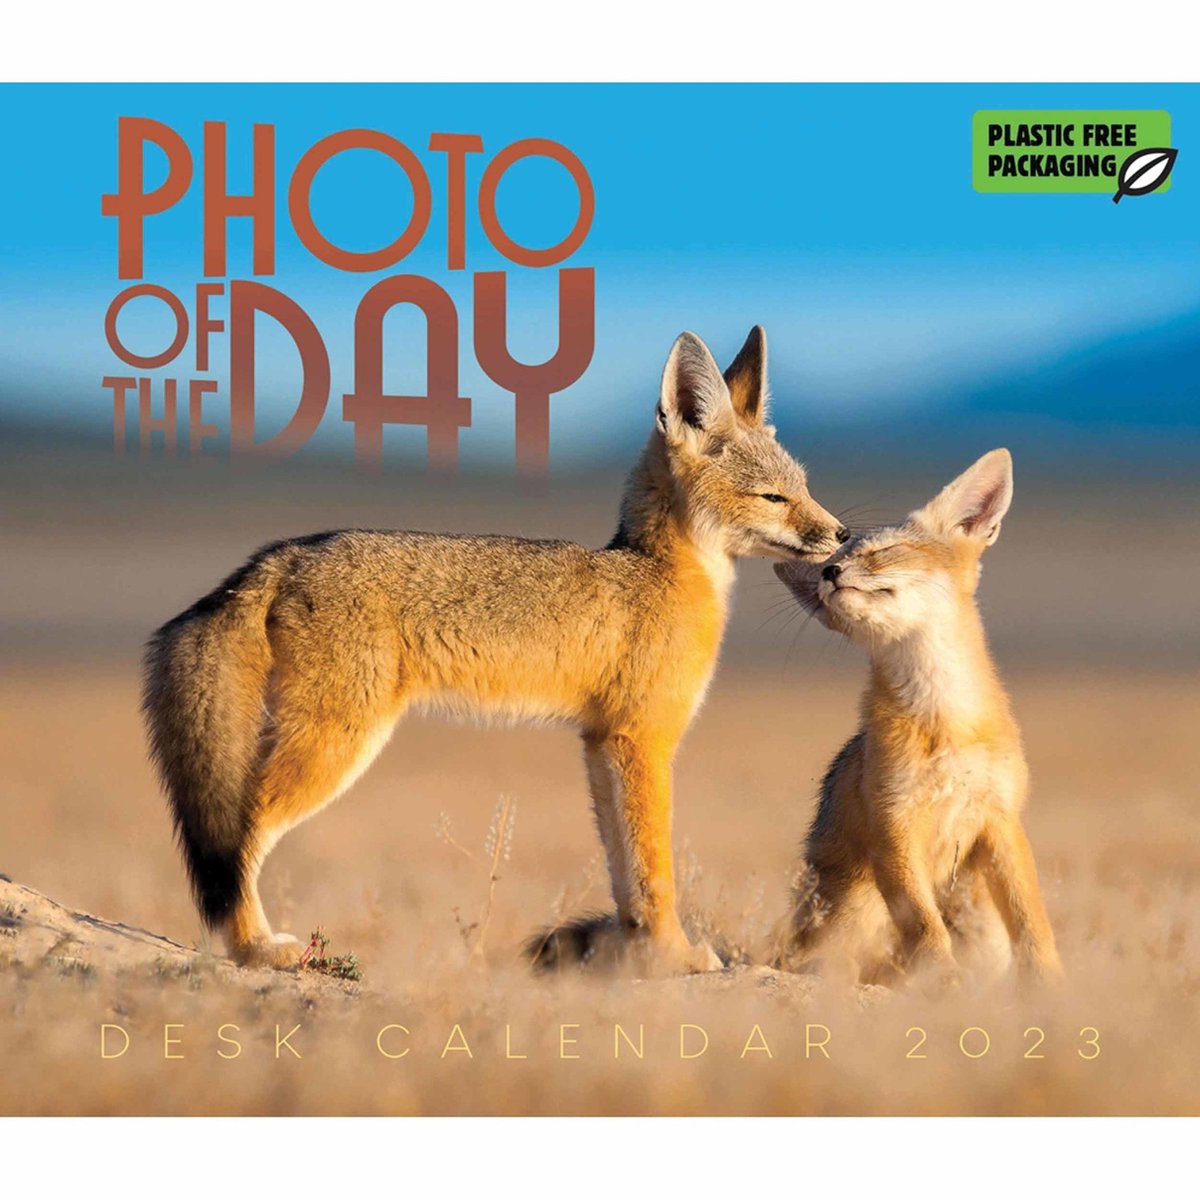 Photo of the Day National Geographic Kalender 2023 Boxed